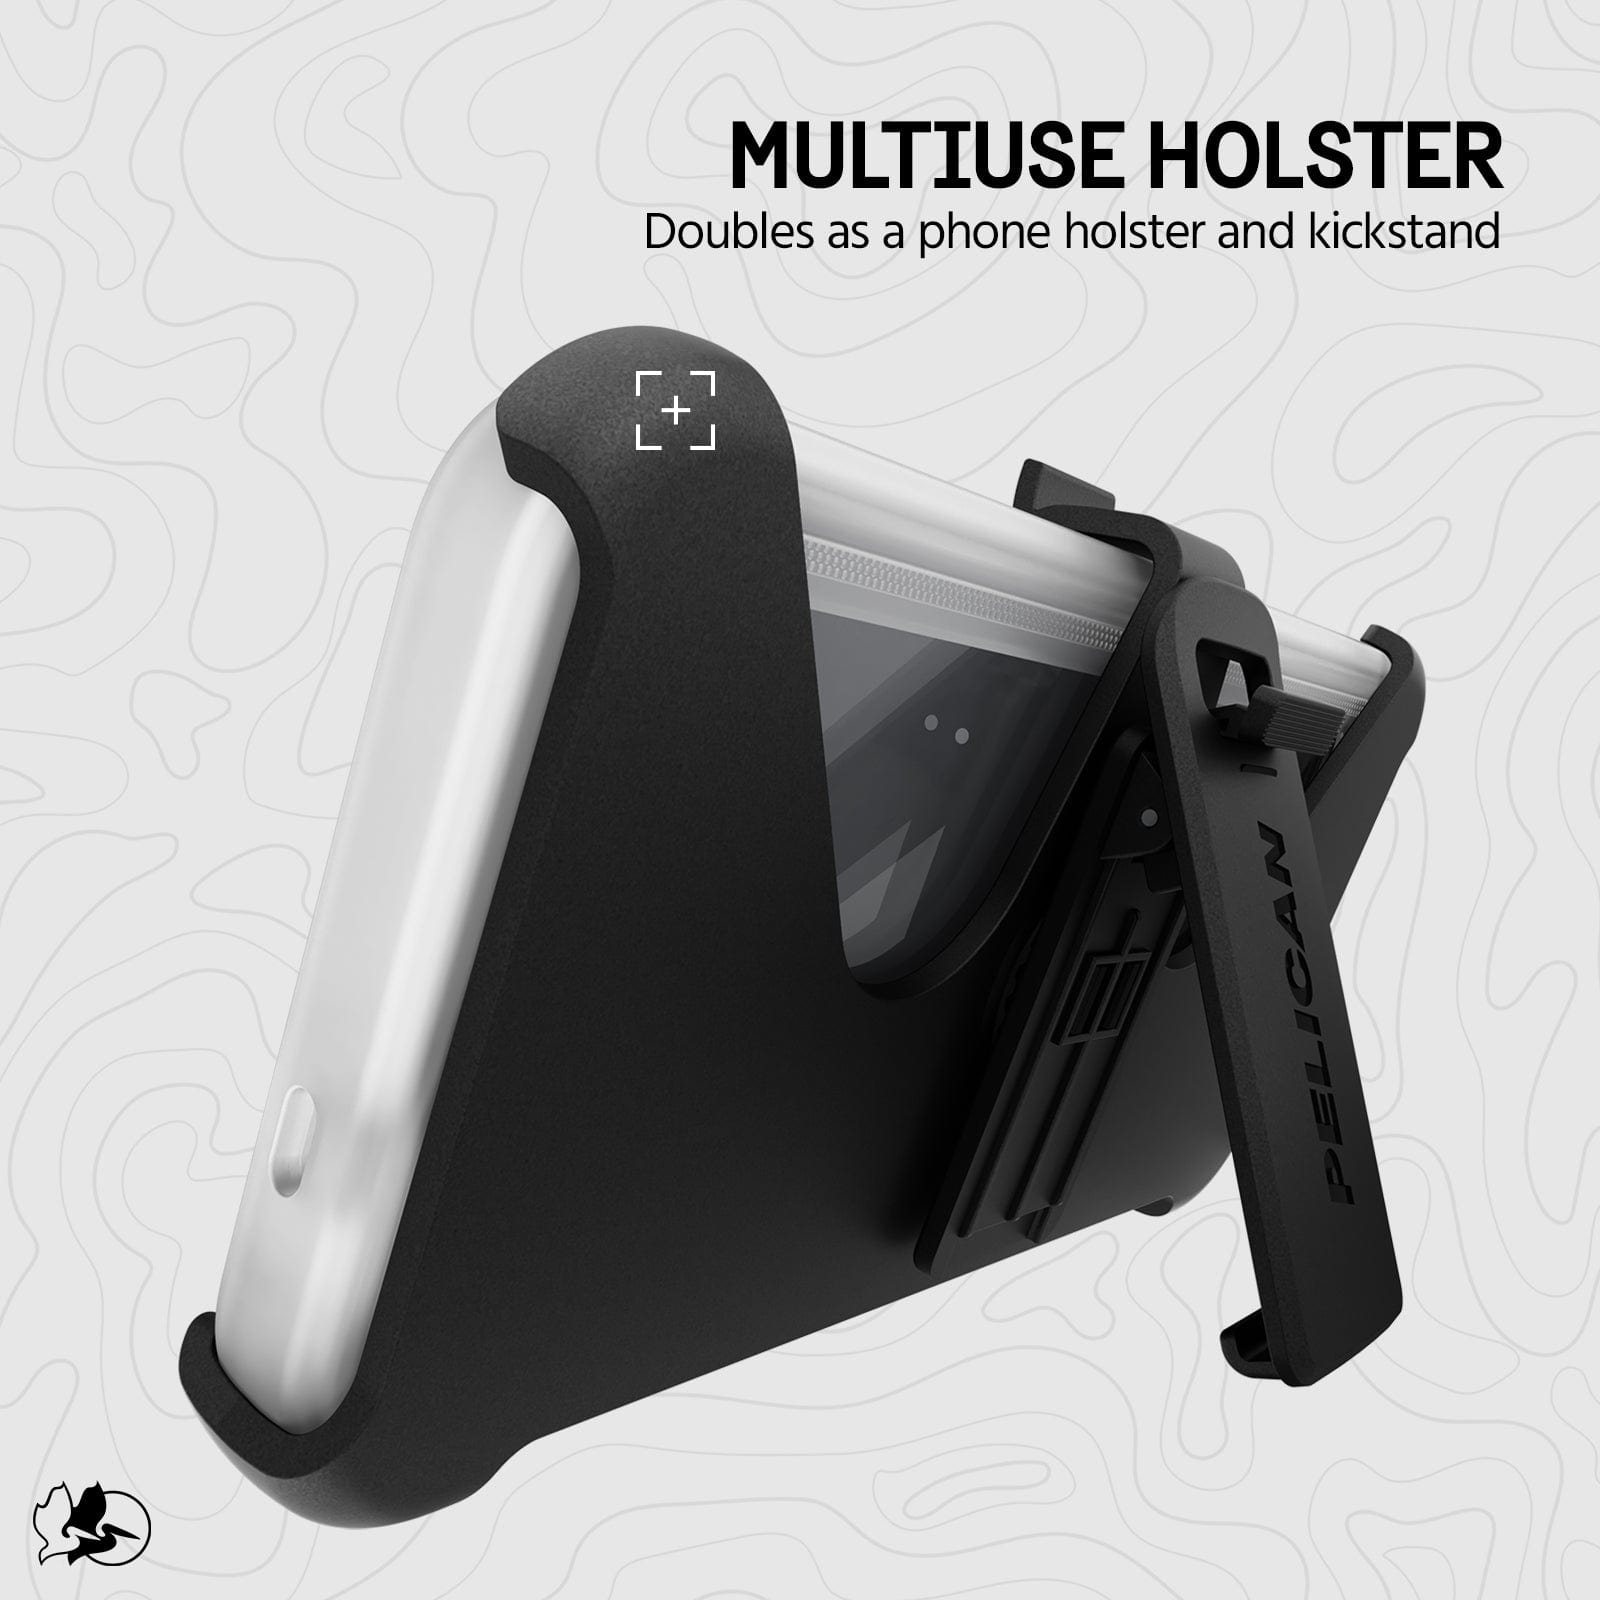 MULTIUSE HOLSTER. DOUBLES AS A PHONE HOLSTER AND KICKSTAND